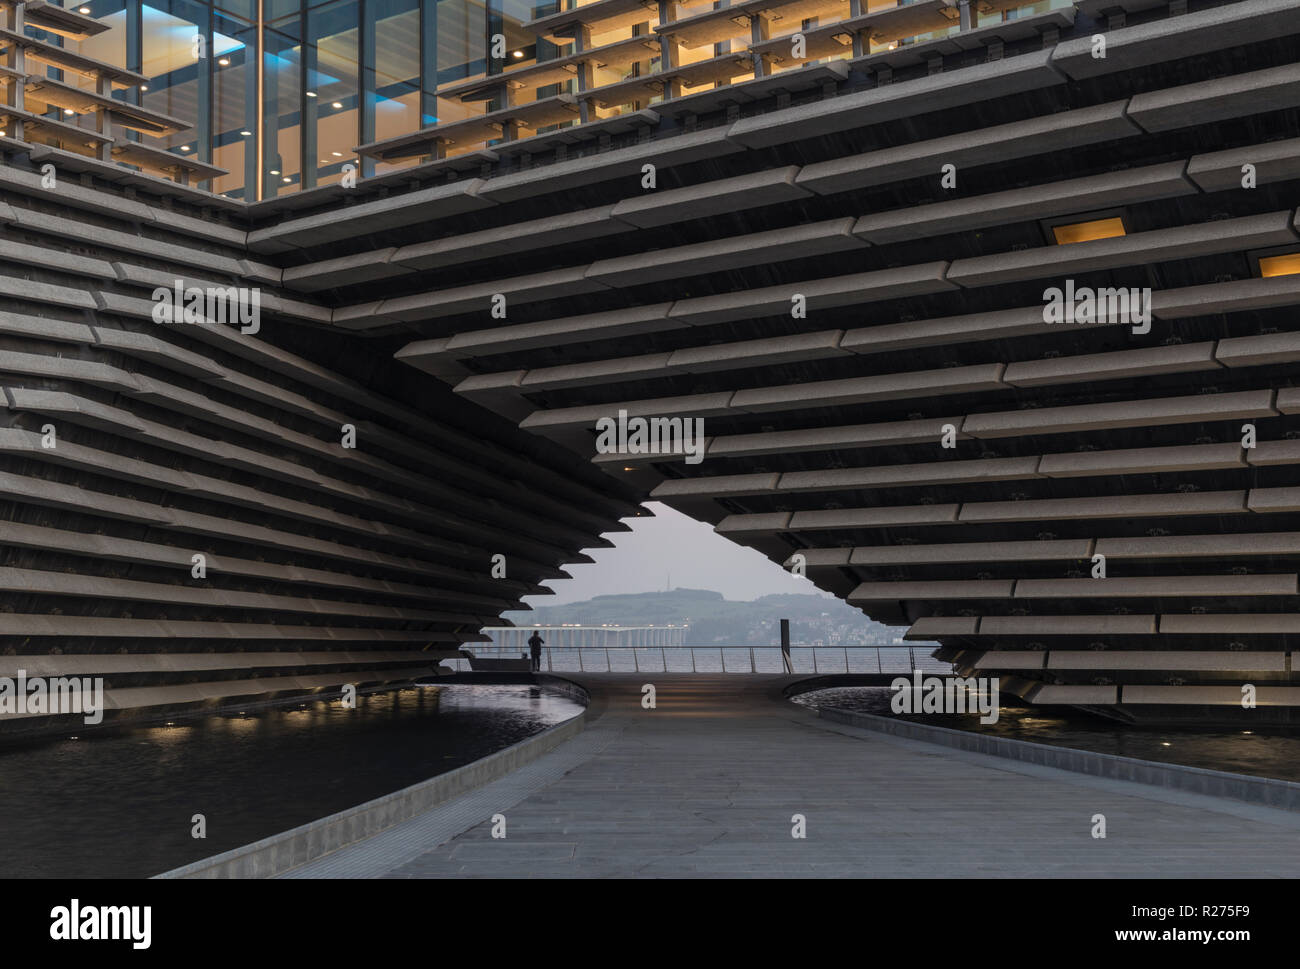 The new V&A design museum on Dundee's regenerated waterfront has already passed the 100,000 visitor mark within 2months of opening, Dundee Scotland UK Stock Photo